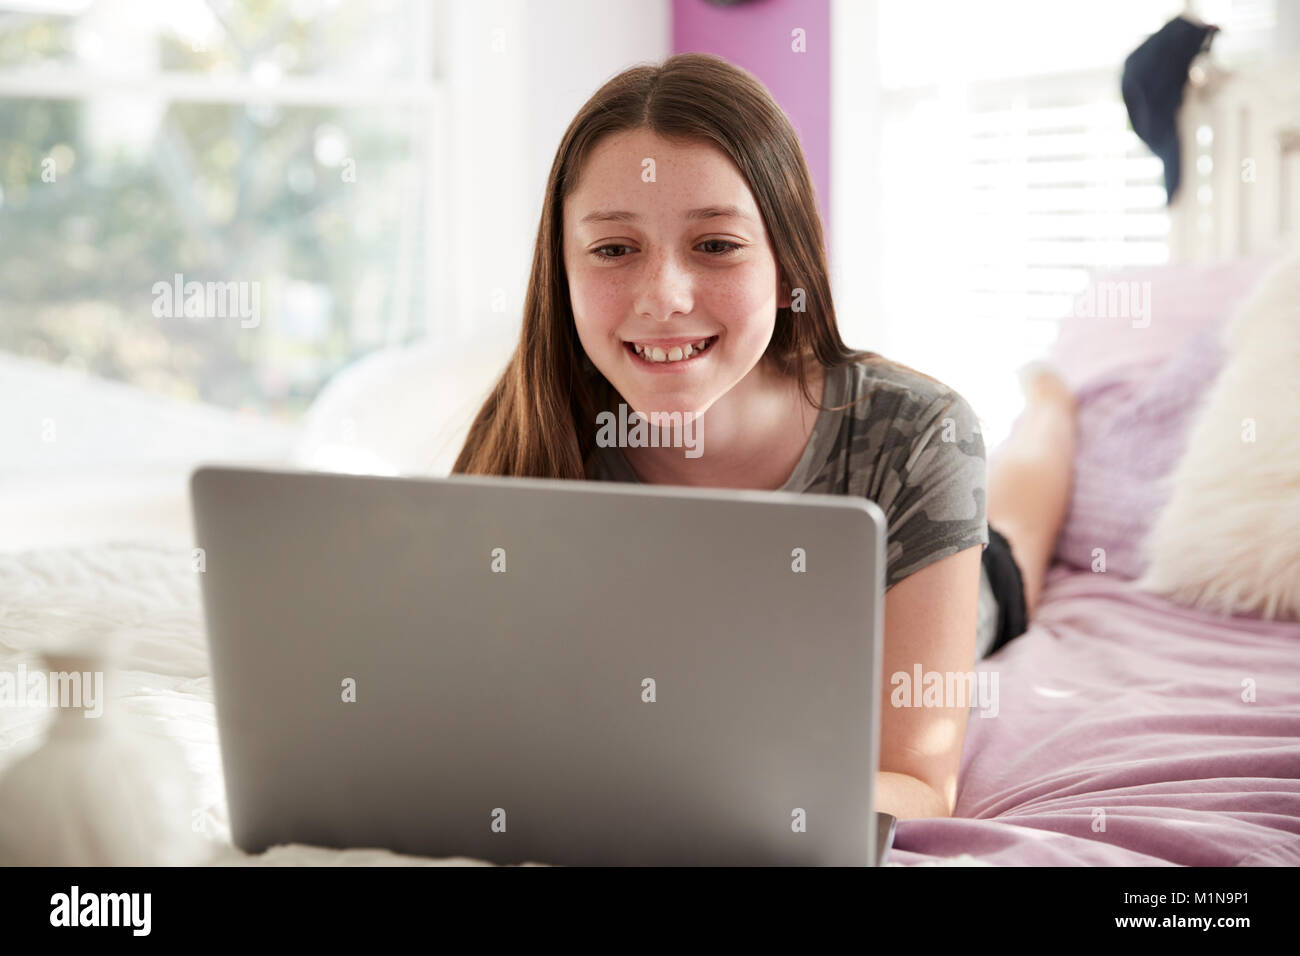 Teenage girl lying on bed using a laptop computer, close up Stock Photo